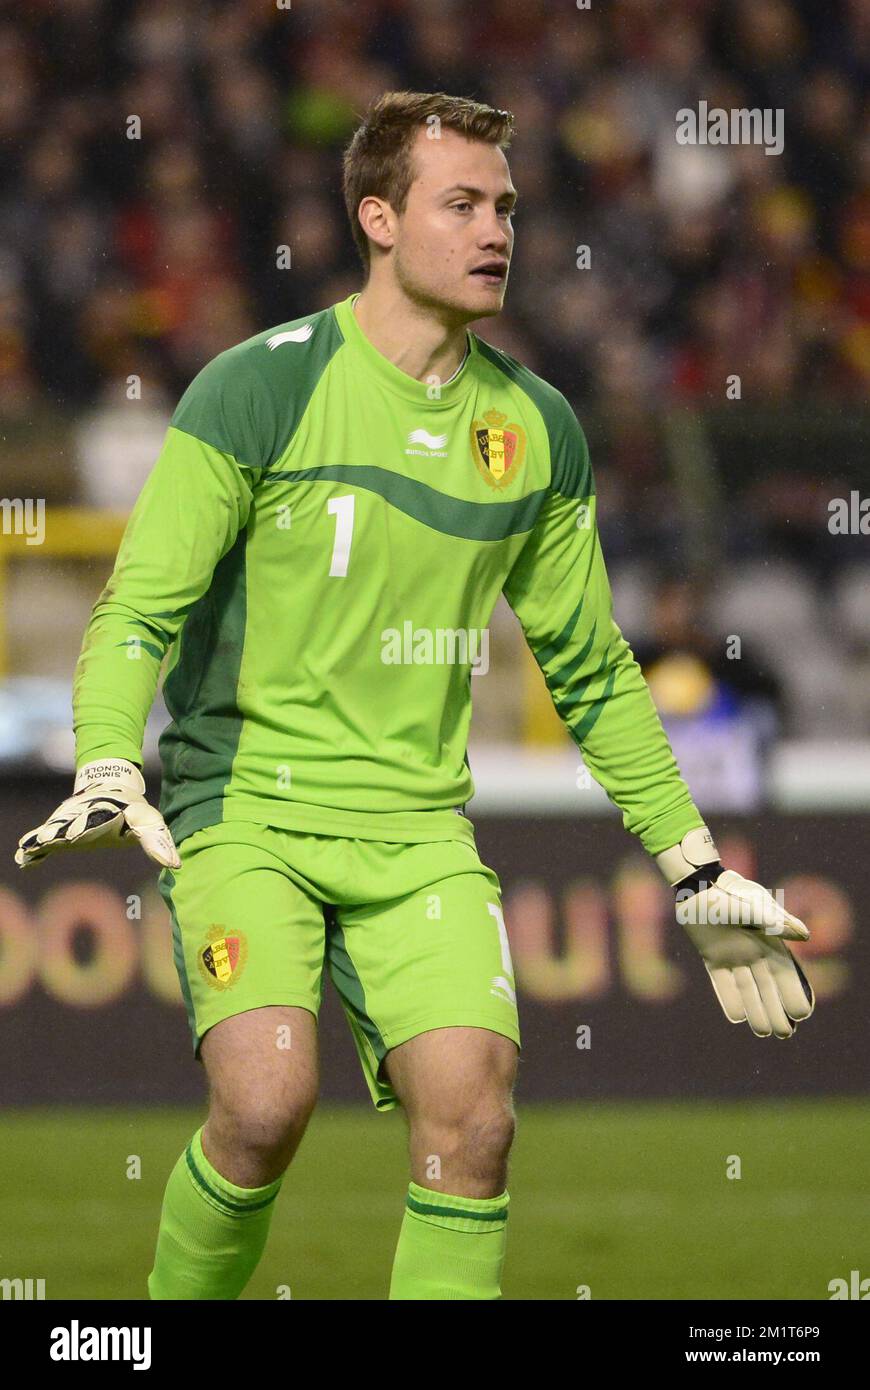 Belgium's goalkeeper Simon Mignolet reacts during a friendly soccer game between the Belgian national soccer team Red Devils and Colombia, at the Koning Boudewijn Stadion - Stade Roi Baudouin in Brussels, on Thursday 14 November 2013. BELGA PHOTO DIRK WAEM Stock Photo